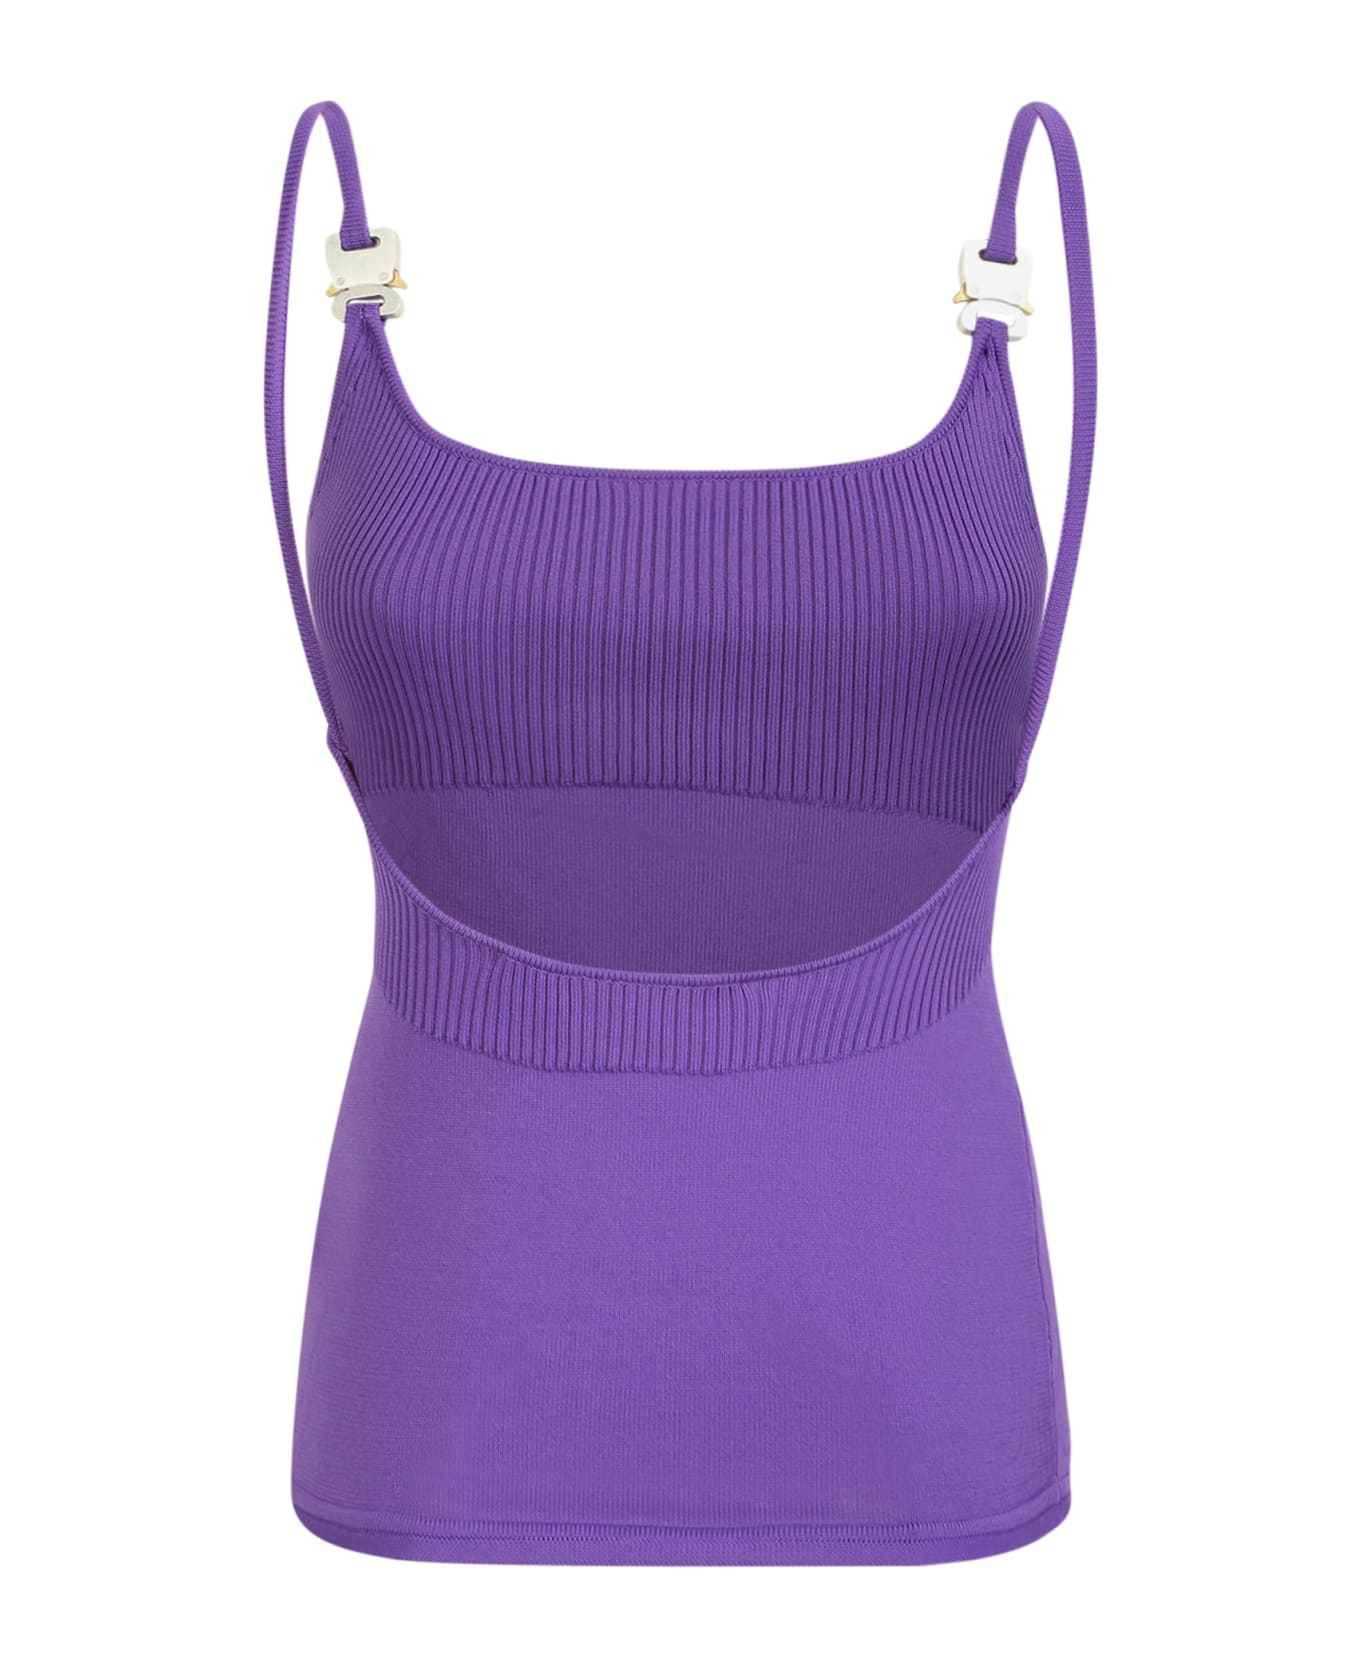 1017 ALYX 9SM Top With A Bold Hue And Understated Silhouette - Purple